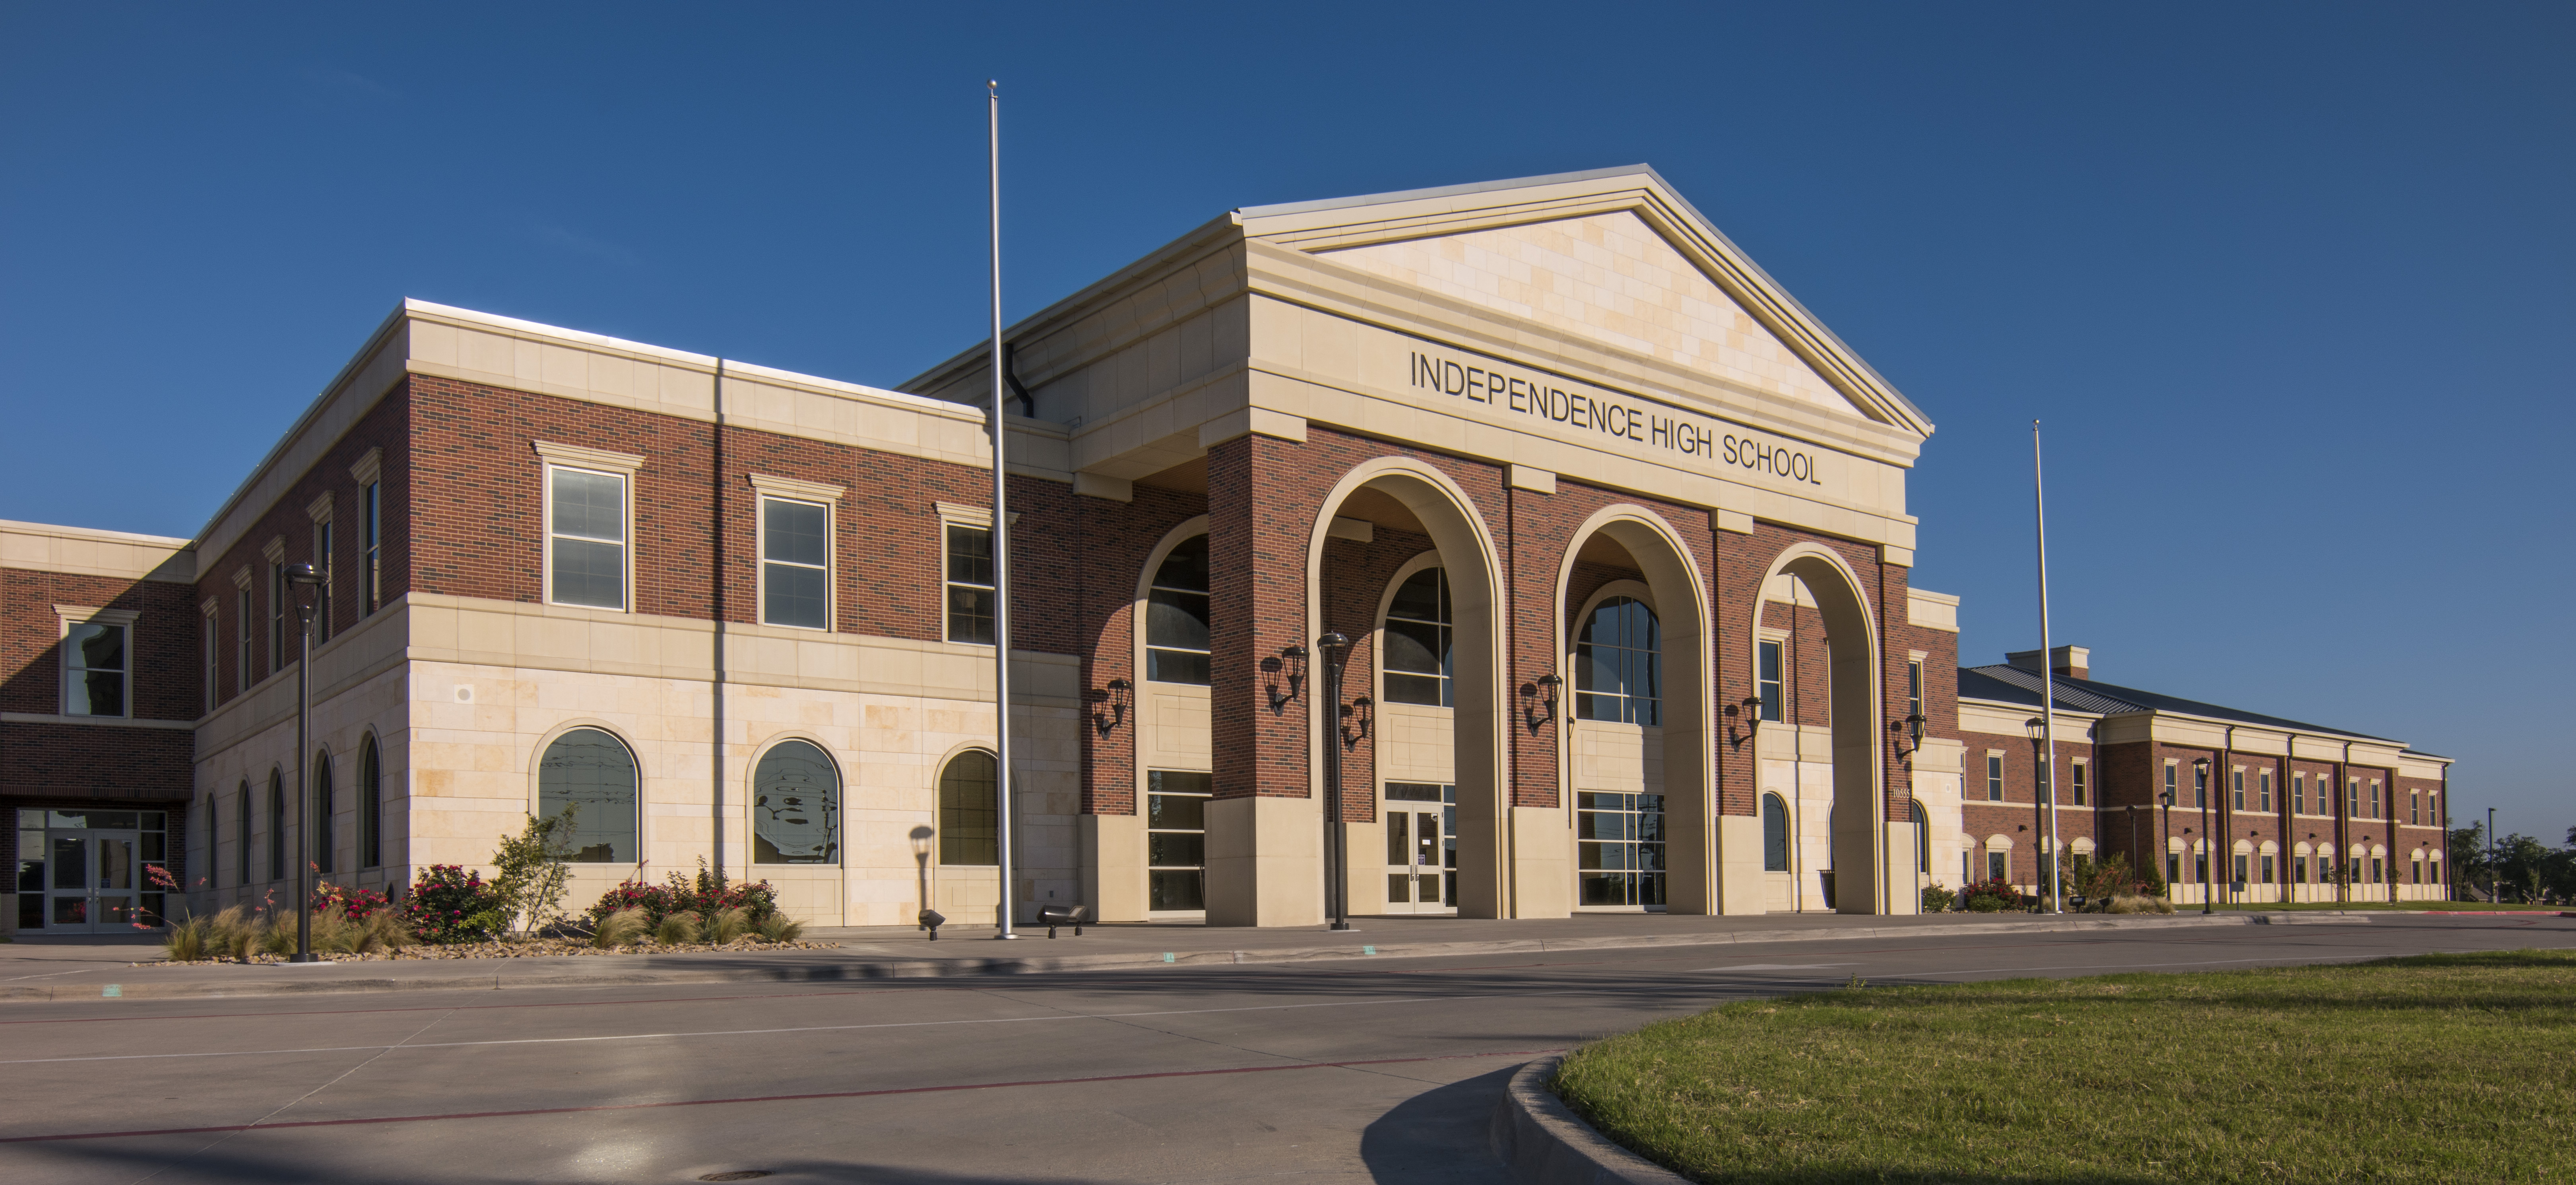  Frisco ISD | Independence High School category